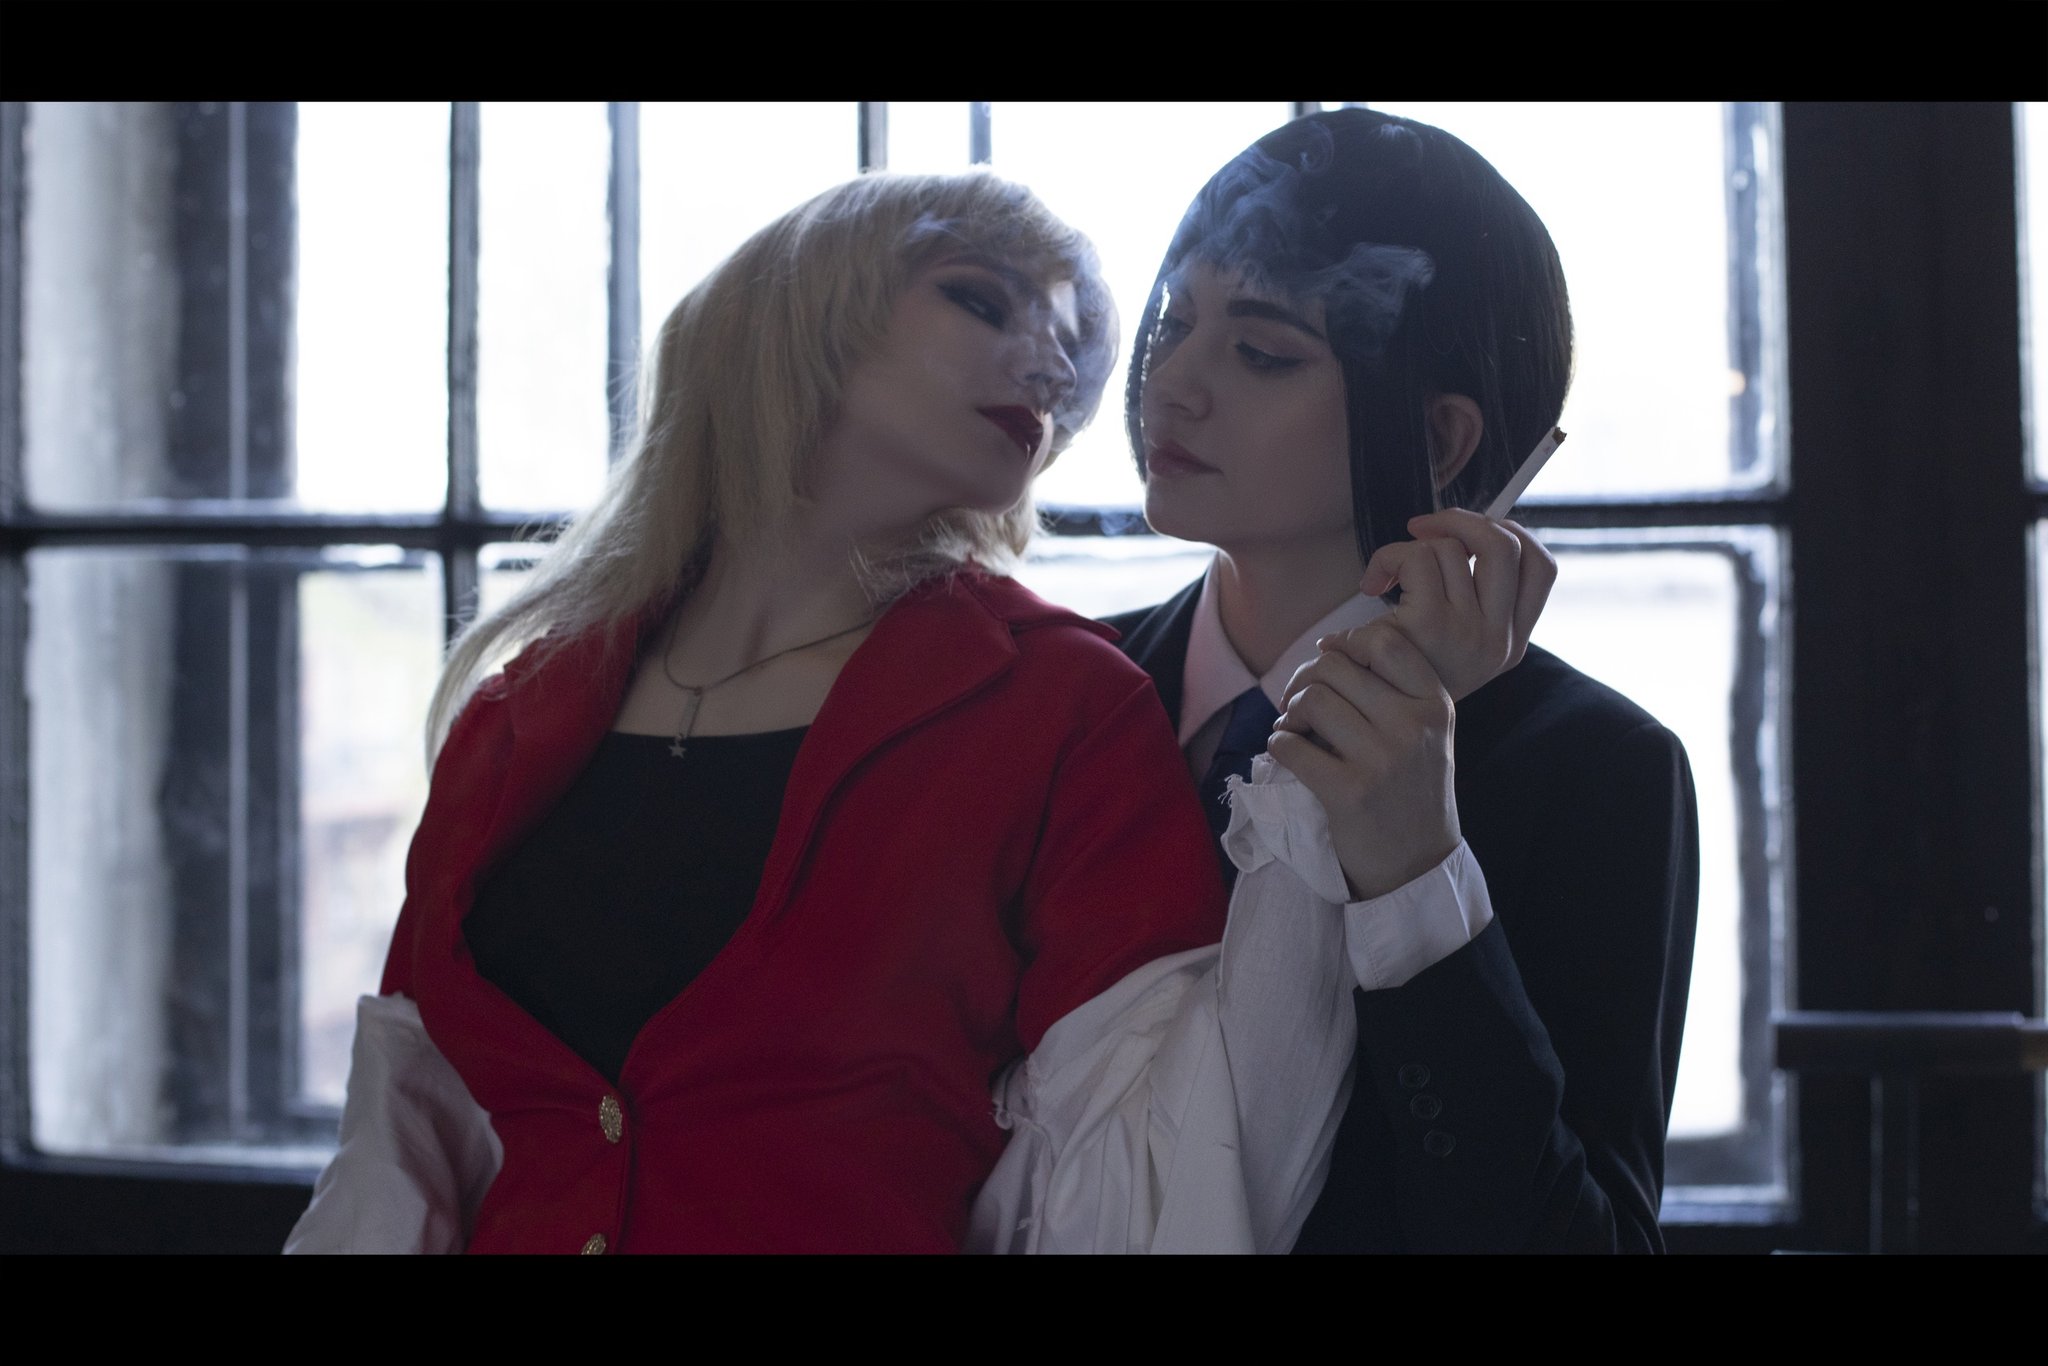 Tchk Psycho Pass P 2 I M Begging I M Begging I M Begging No More Rules Mua Nealien13 Ph Donnabasia Angstion Yayoi By Chudokasaevich Shion By Me Cosplay Psychopass